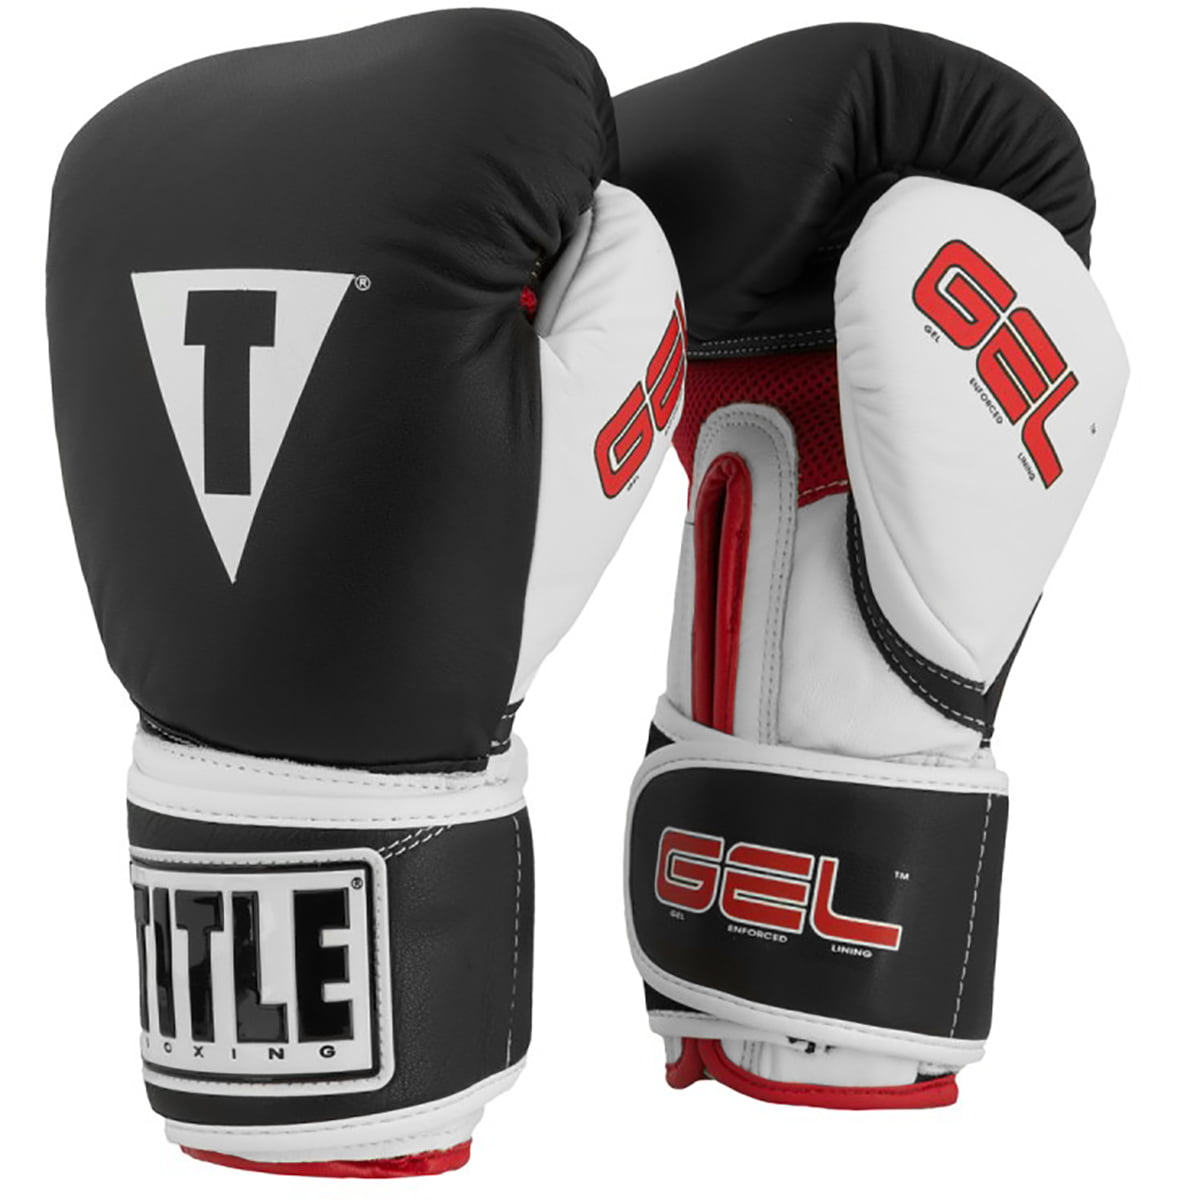 Palm Pads Wraps Gloves Shield Gel Title Boxing Complete Set 